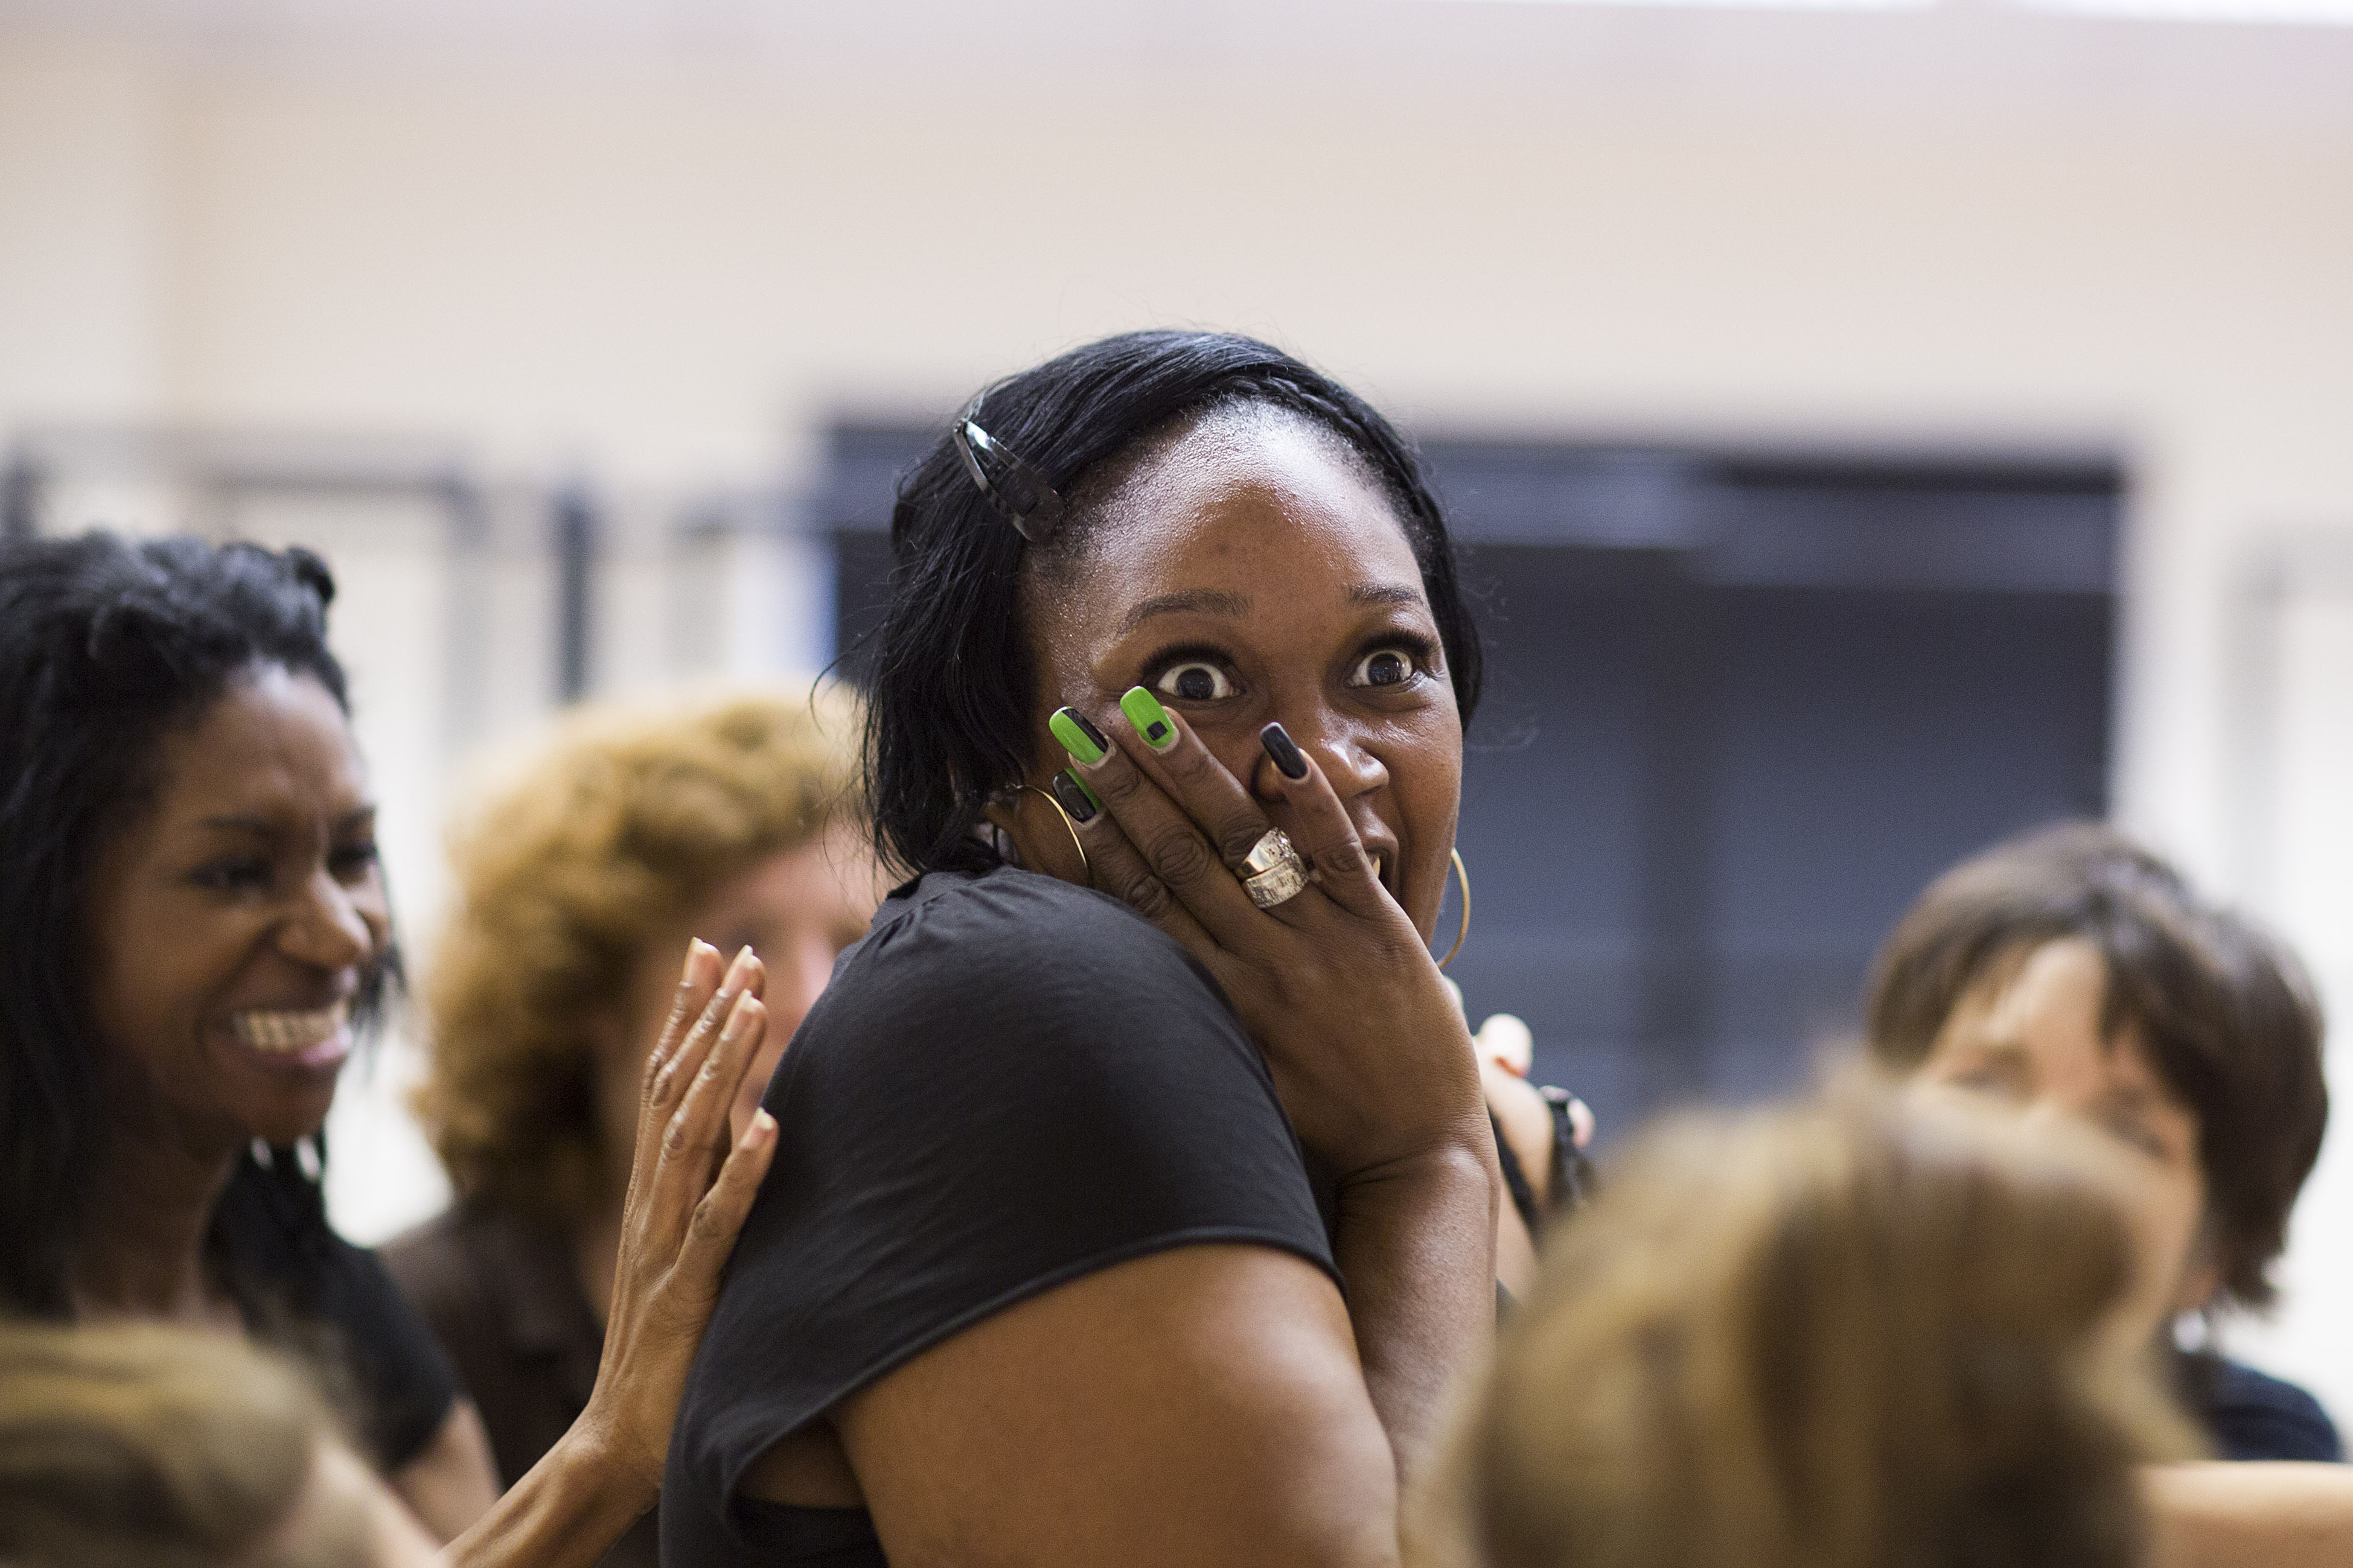 Jennifer Joseph in rehearsals for the Donmar Trilogy. She is laughing and has her hand over her mouth. She is wear a black top and has black and bright green decorative nails.